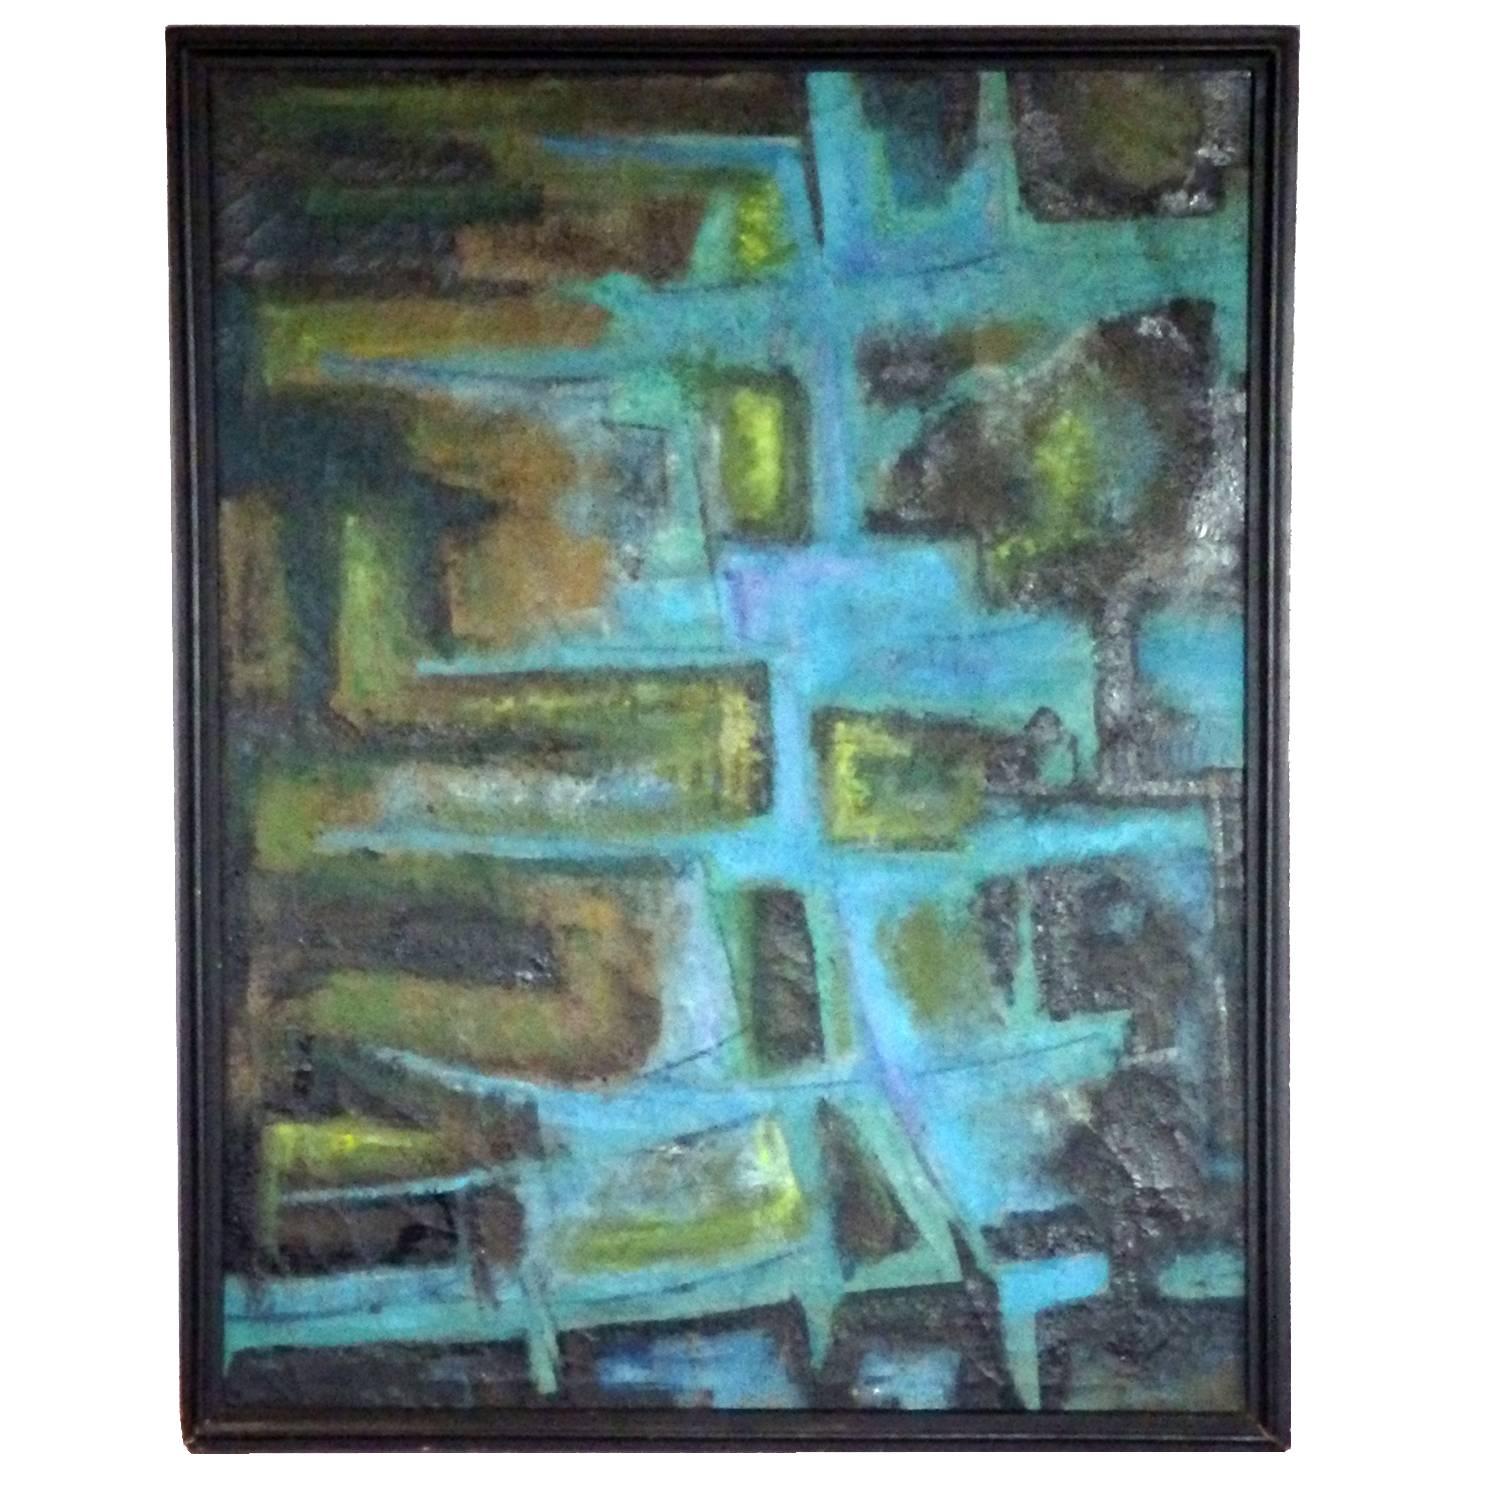 Large Textured Abstract Oil Painting by Robert Berger